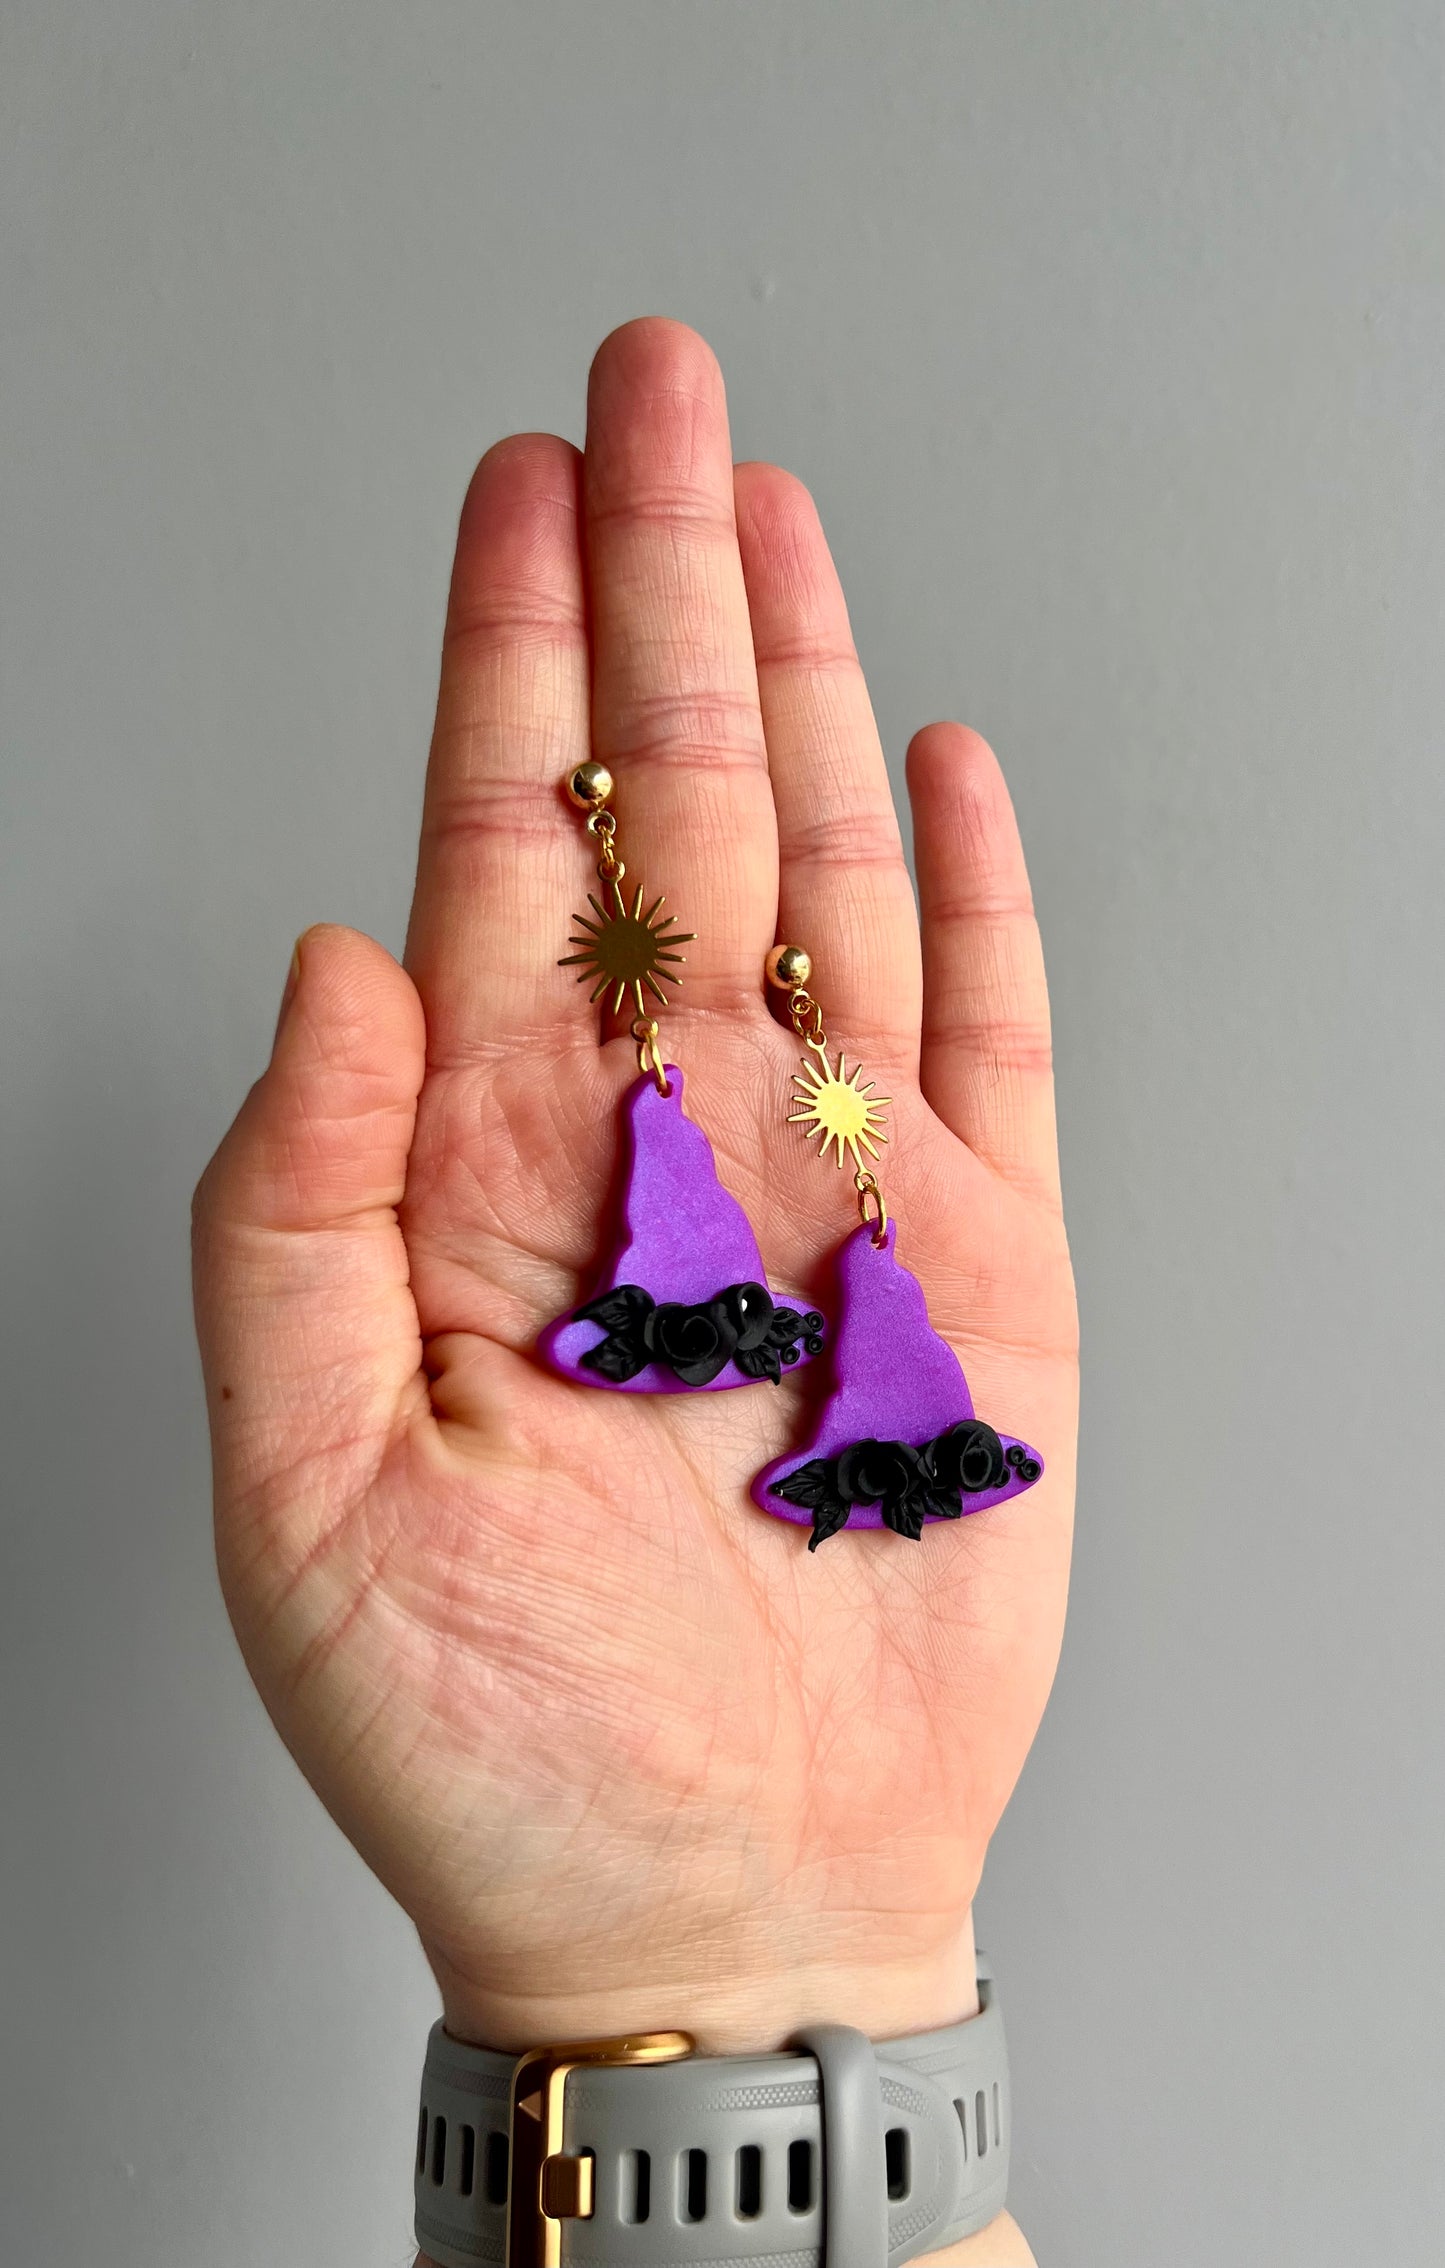 Embrace enchantment with our purple witch hat earrings, featuring black rose embellishments and a sun charm. Symbolizing wisdom and intuition, these earrings capture the mystique of witch hat folklore